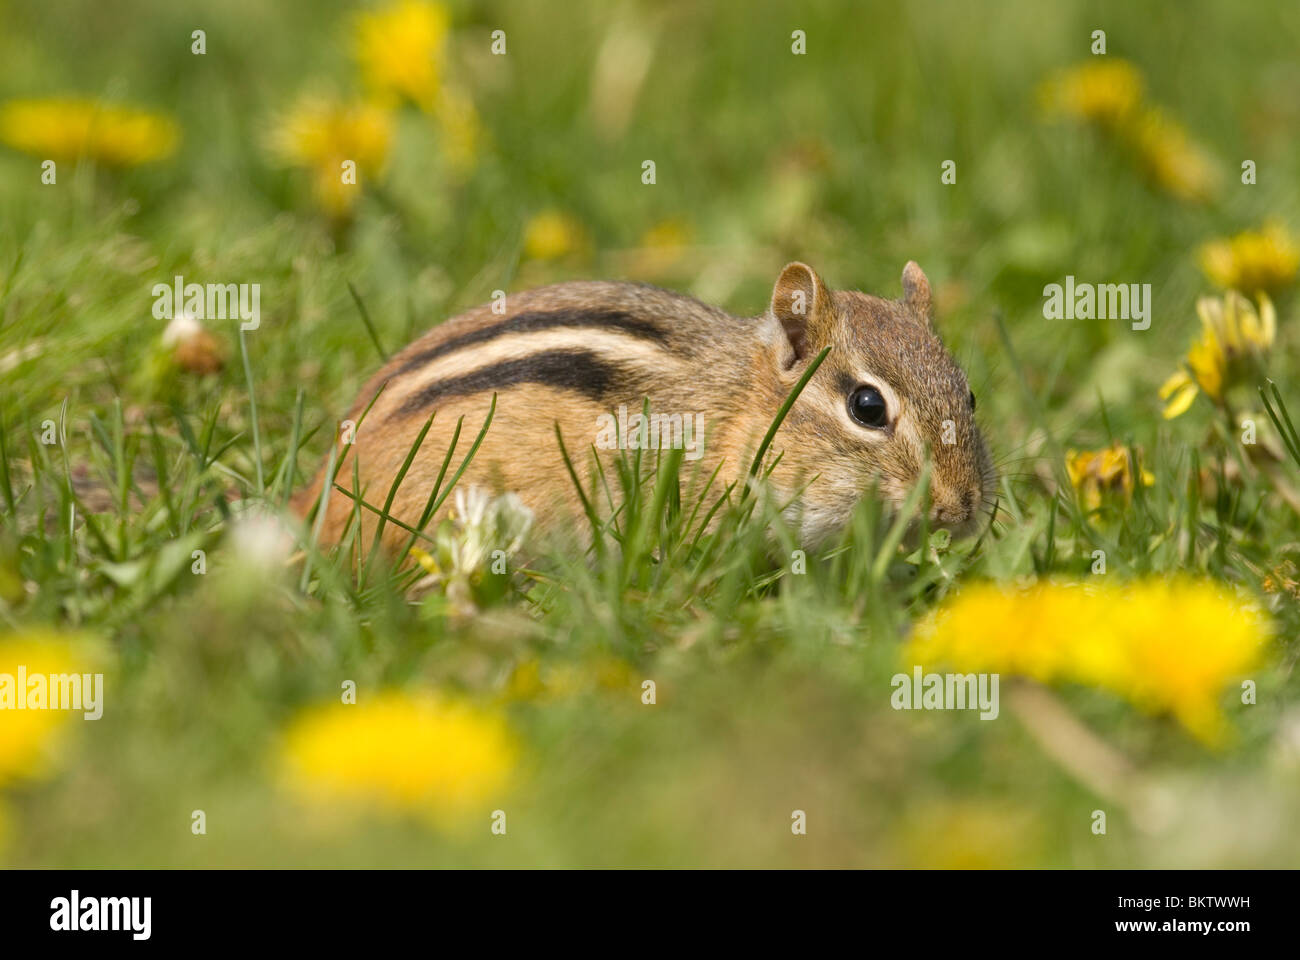 An Eastern Chipmunk sitting in the grass. Stock Photo